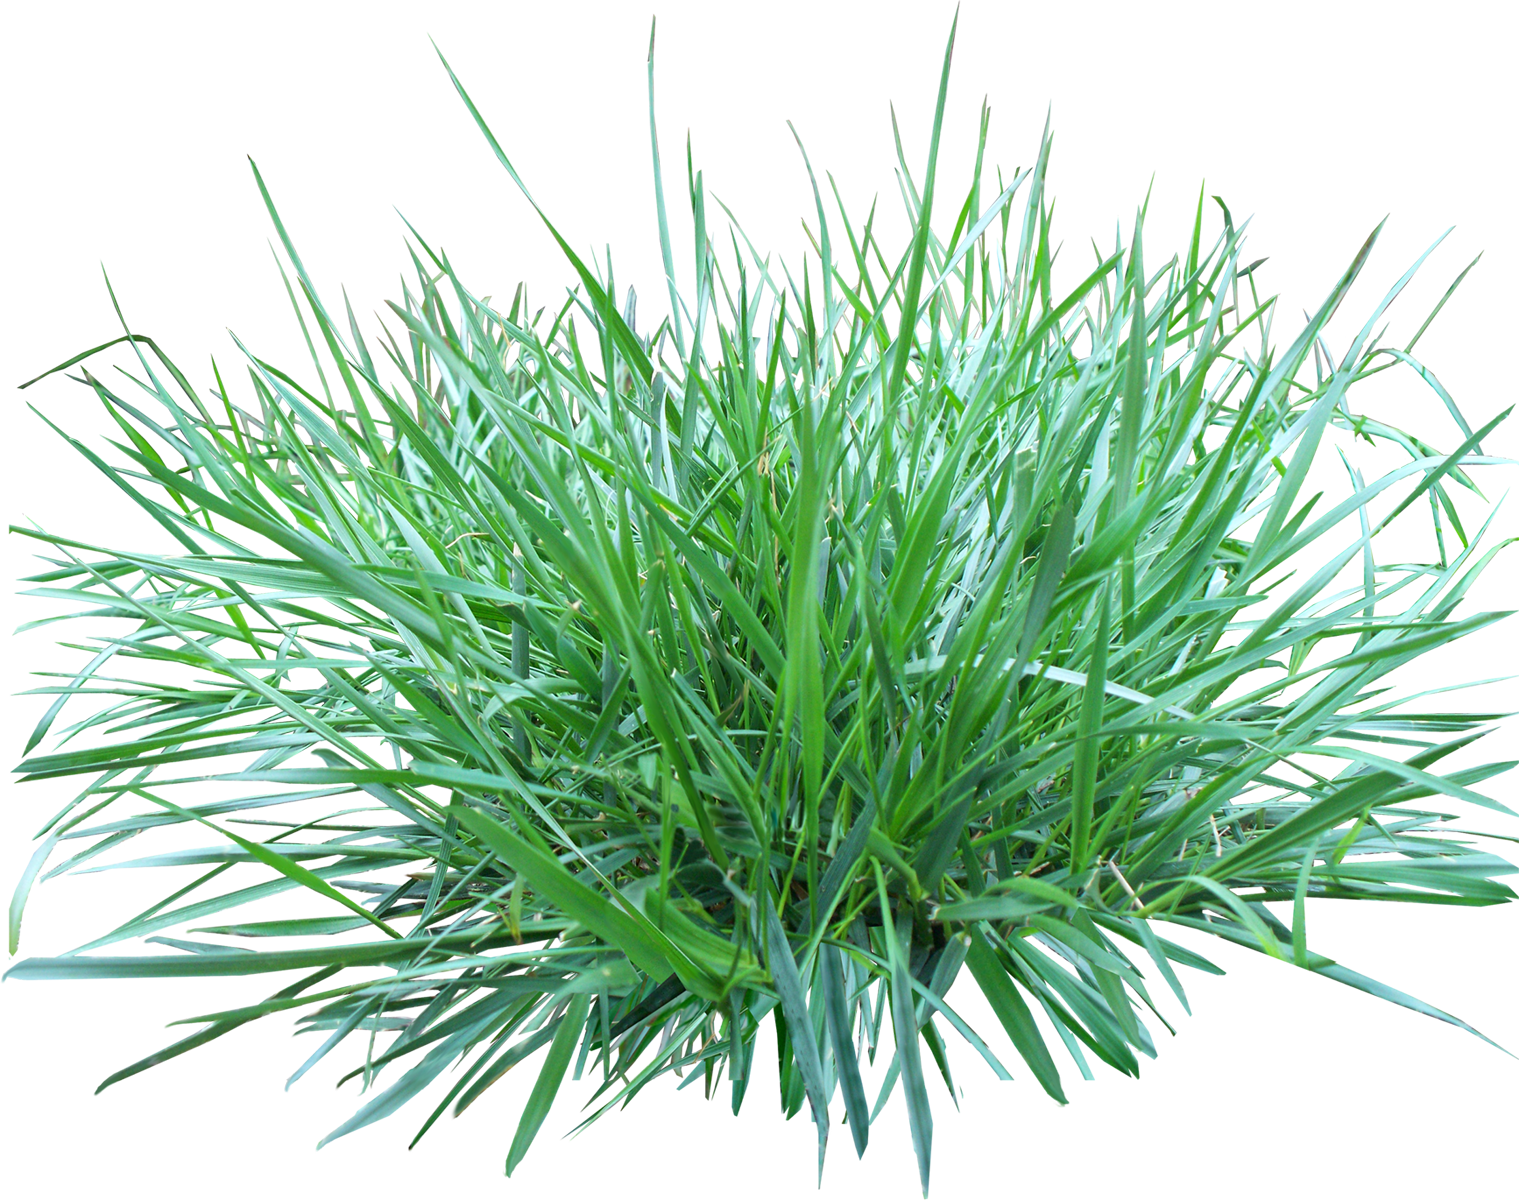 Grass Png Image, Green Picture Image - Arugam Pul (1519x1200)